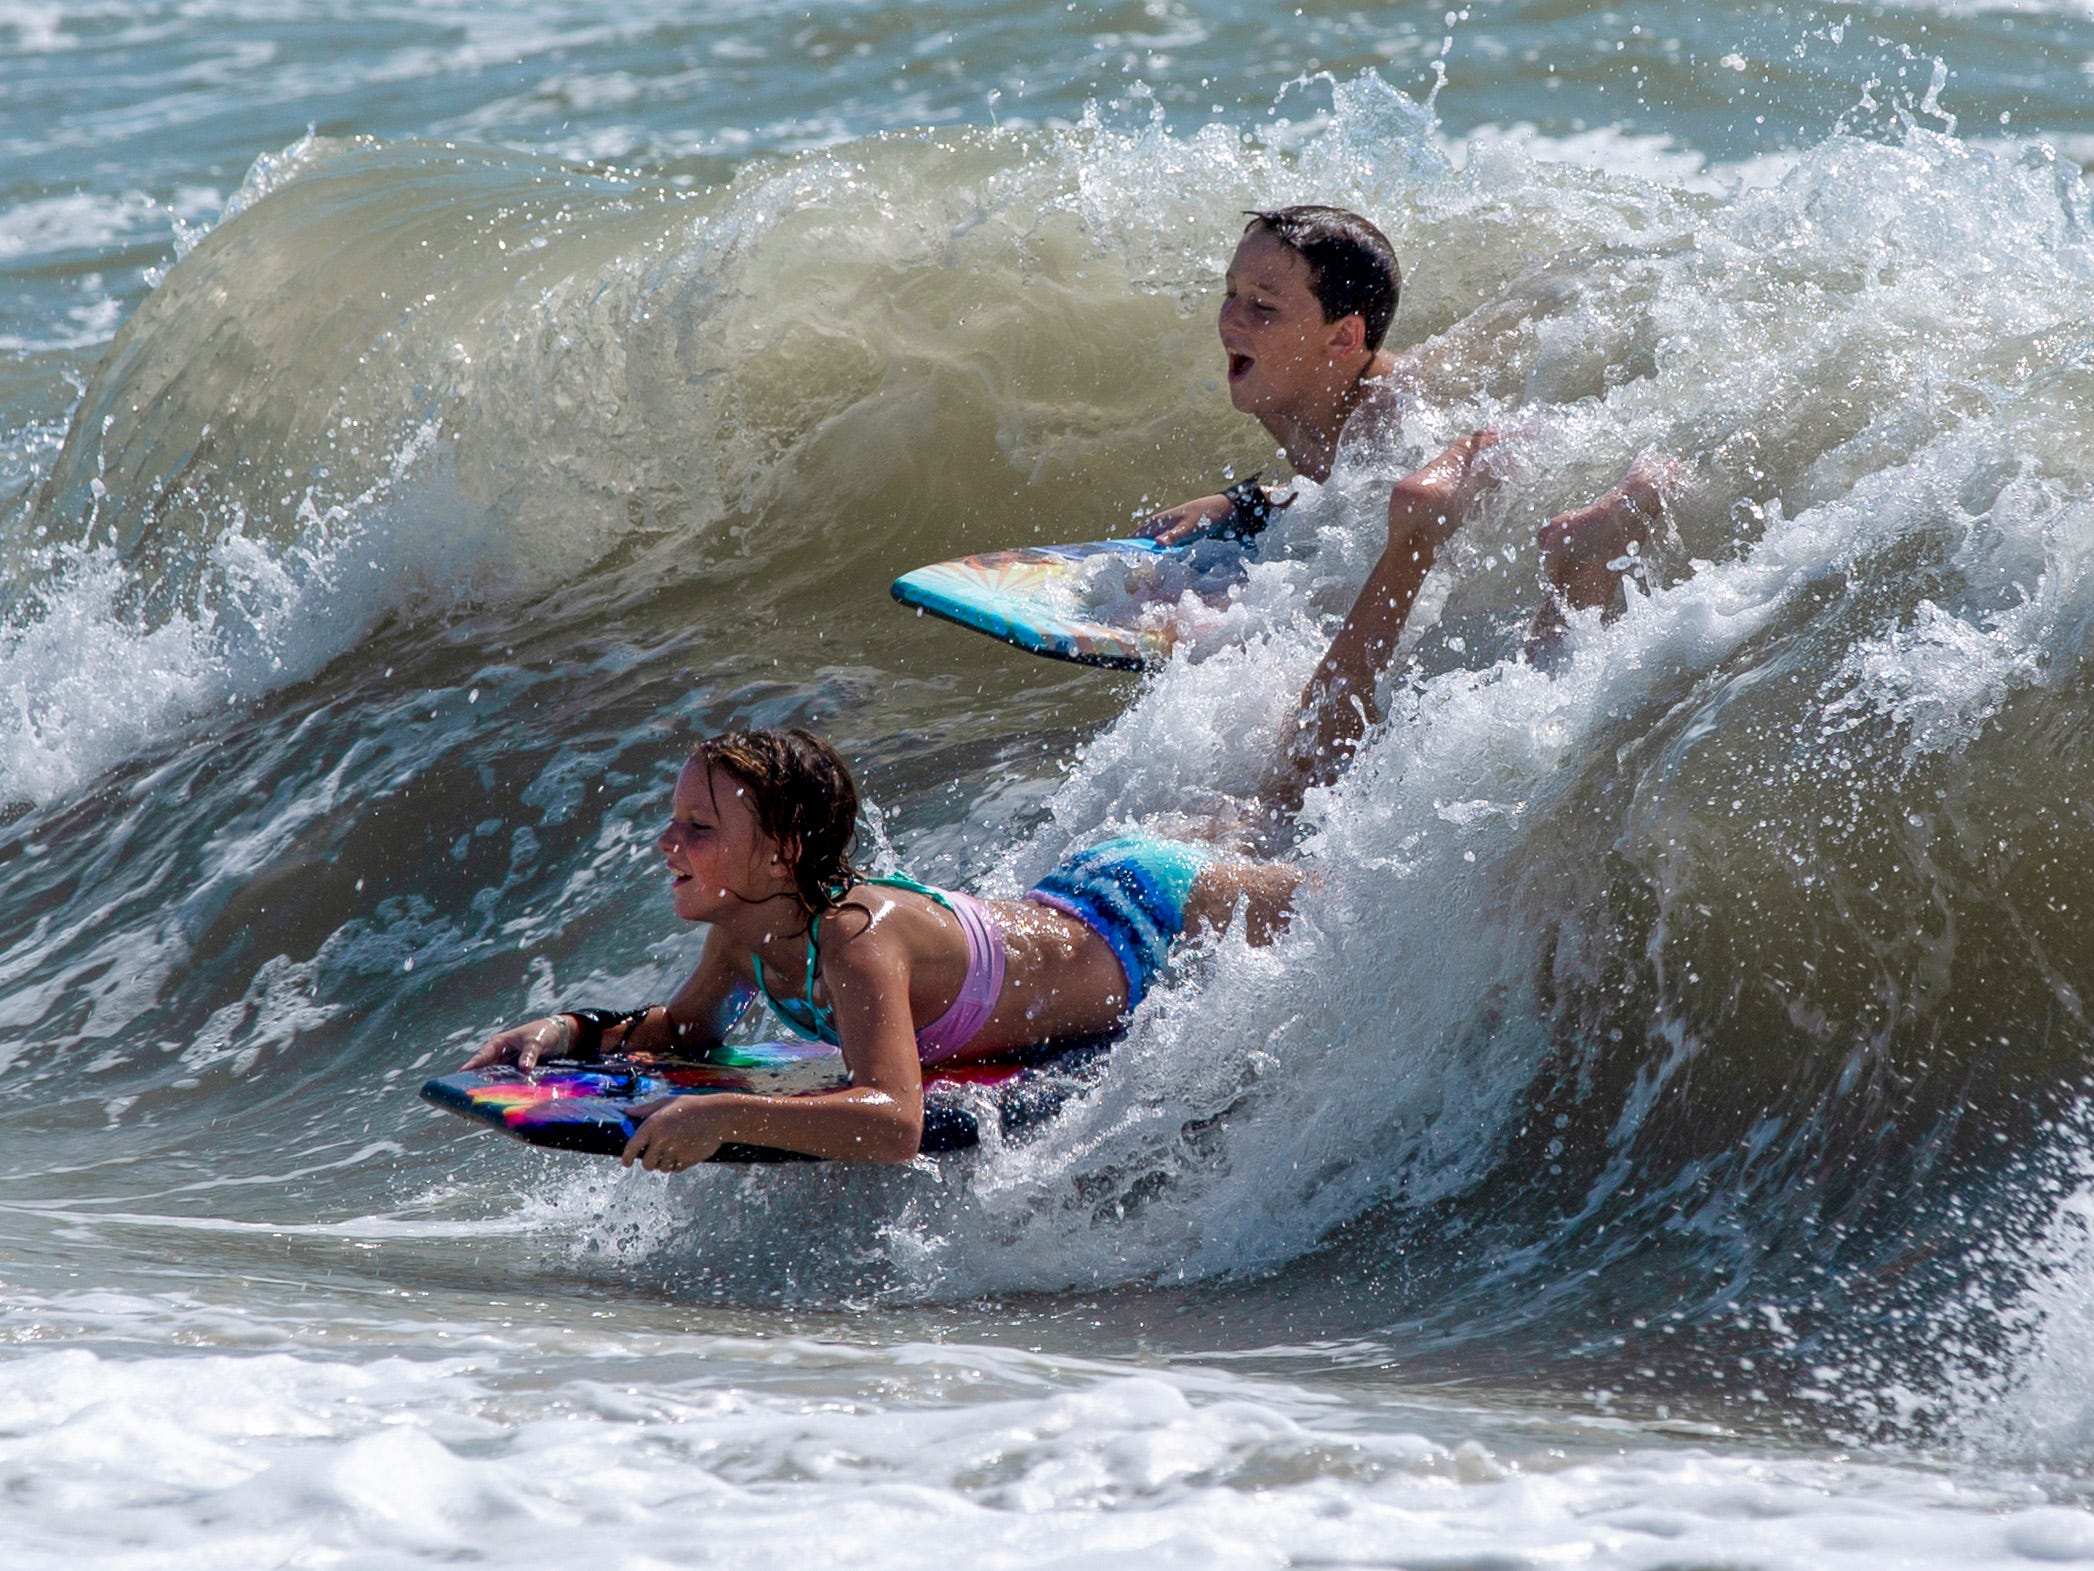 Two teenagers catch a wave near the Naples Beach on Tuesday, September 3, 2019. Locals and tourists continue visiting scenic spots in Naples, taking advantage of heavy winds and waves bought on by Hurricane Dorian.